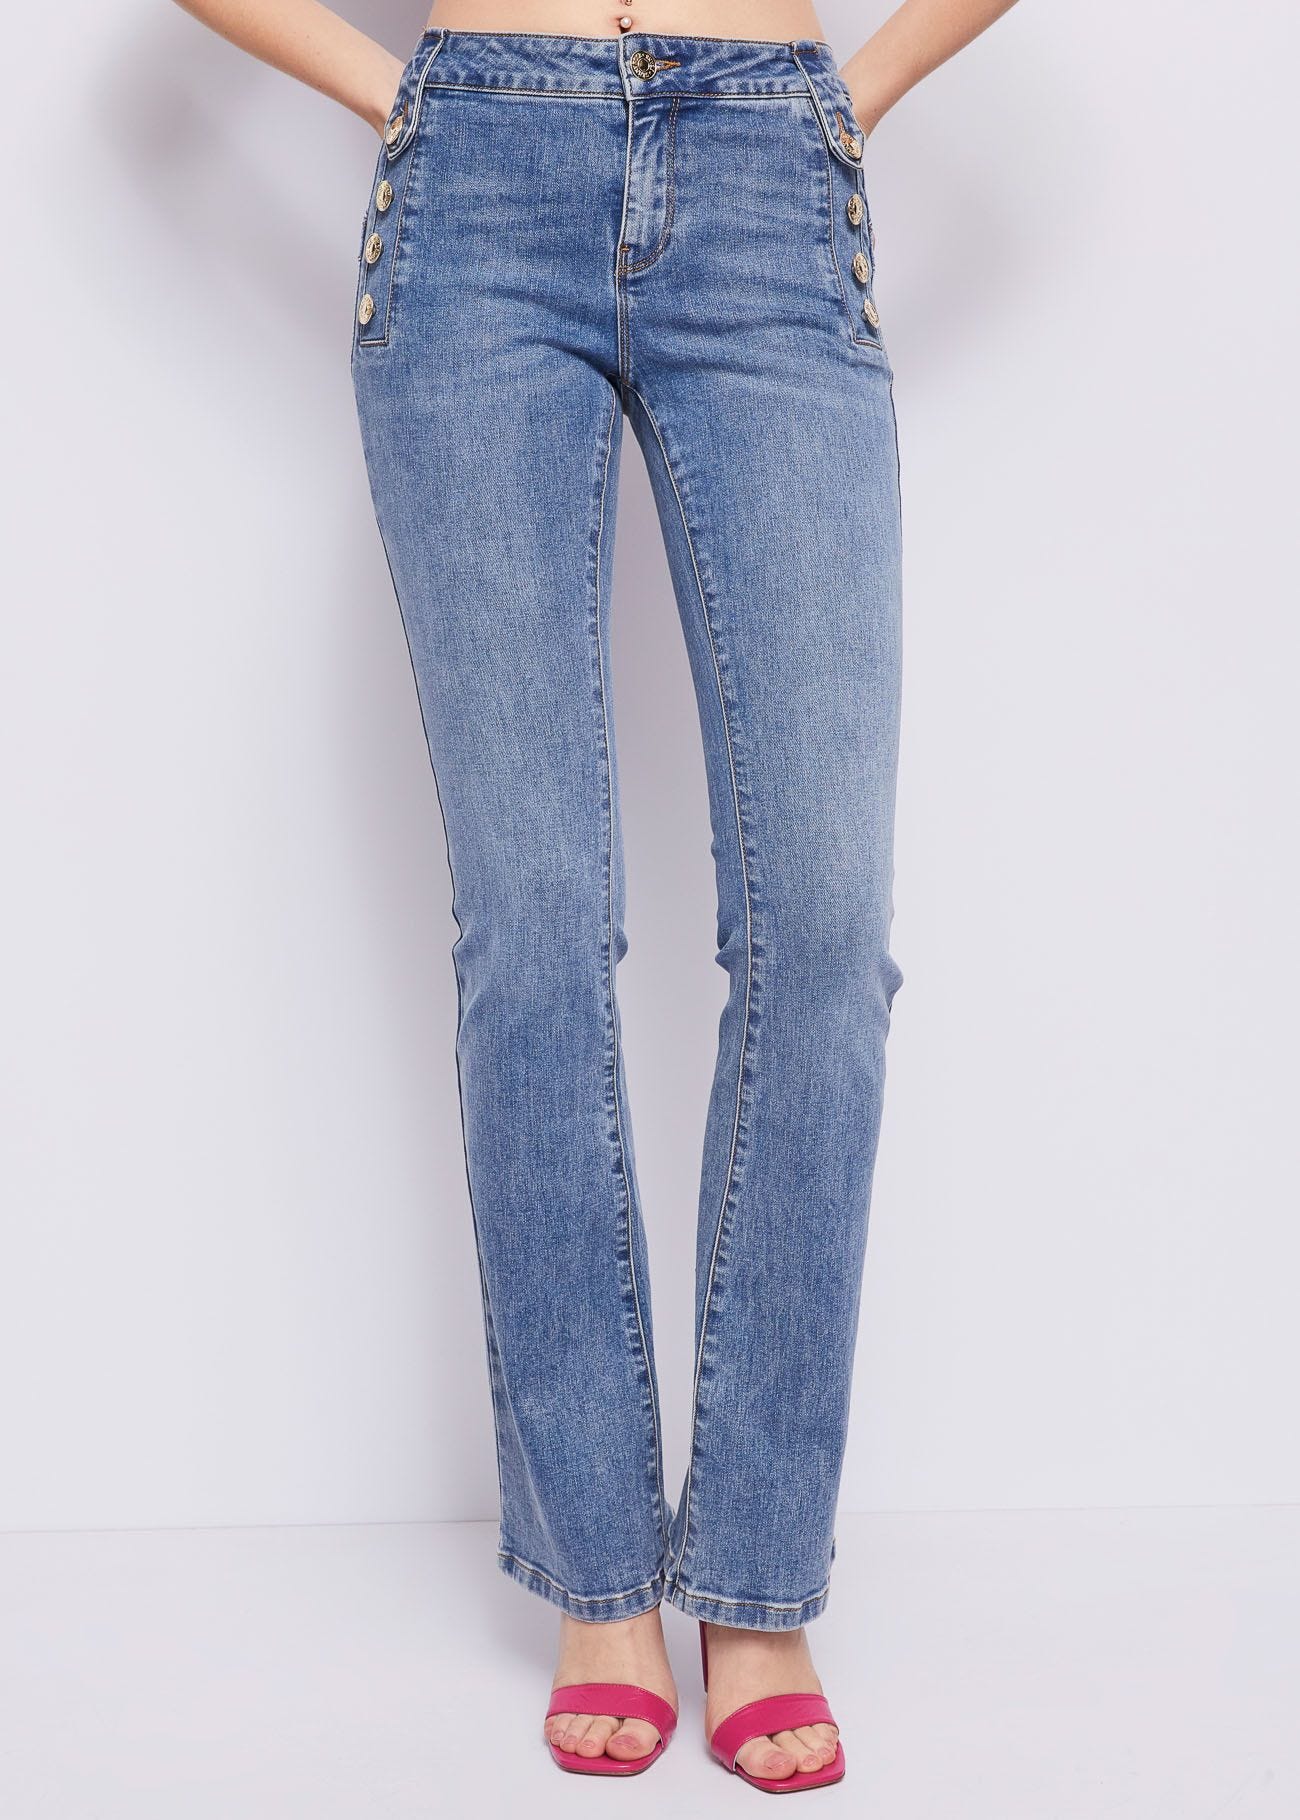 Jeans flaire push-up